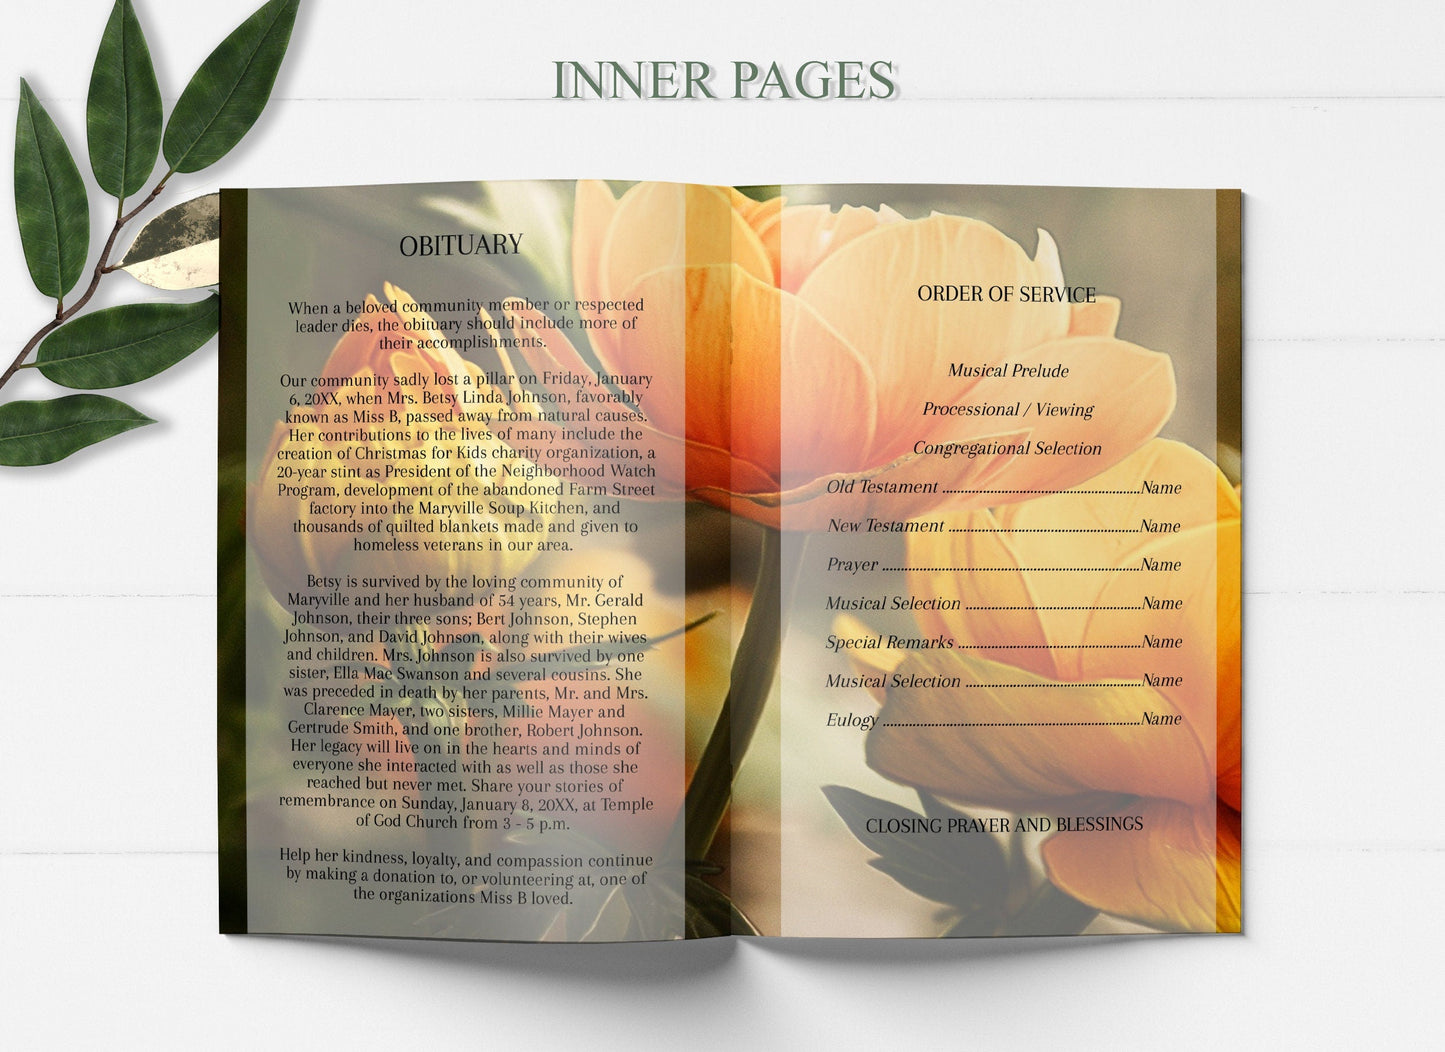 Obituary funeral program template example and order of service example